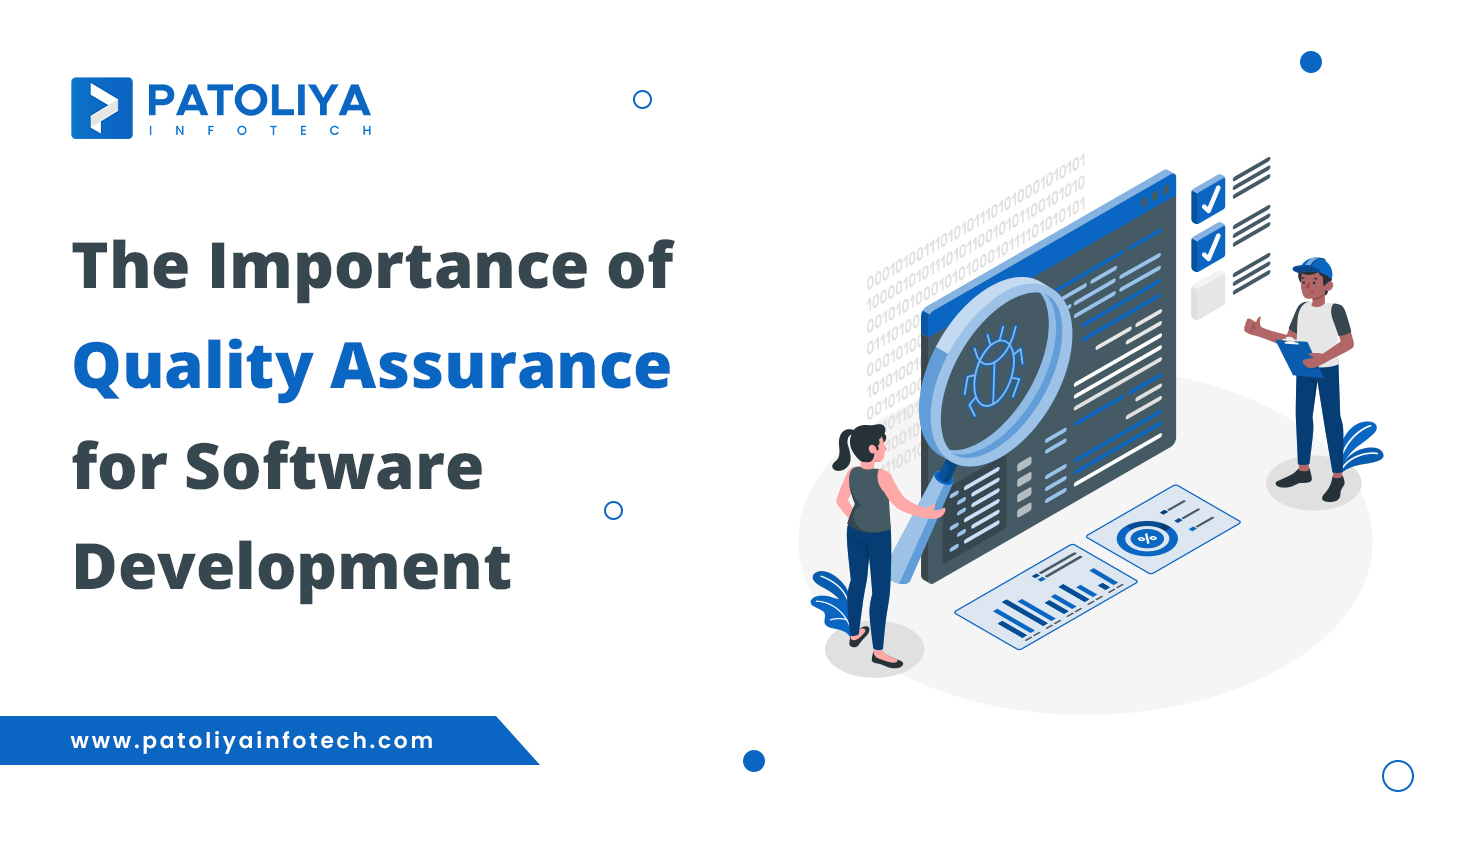 The Importance of Quality Assurance for Software Development